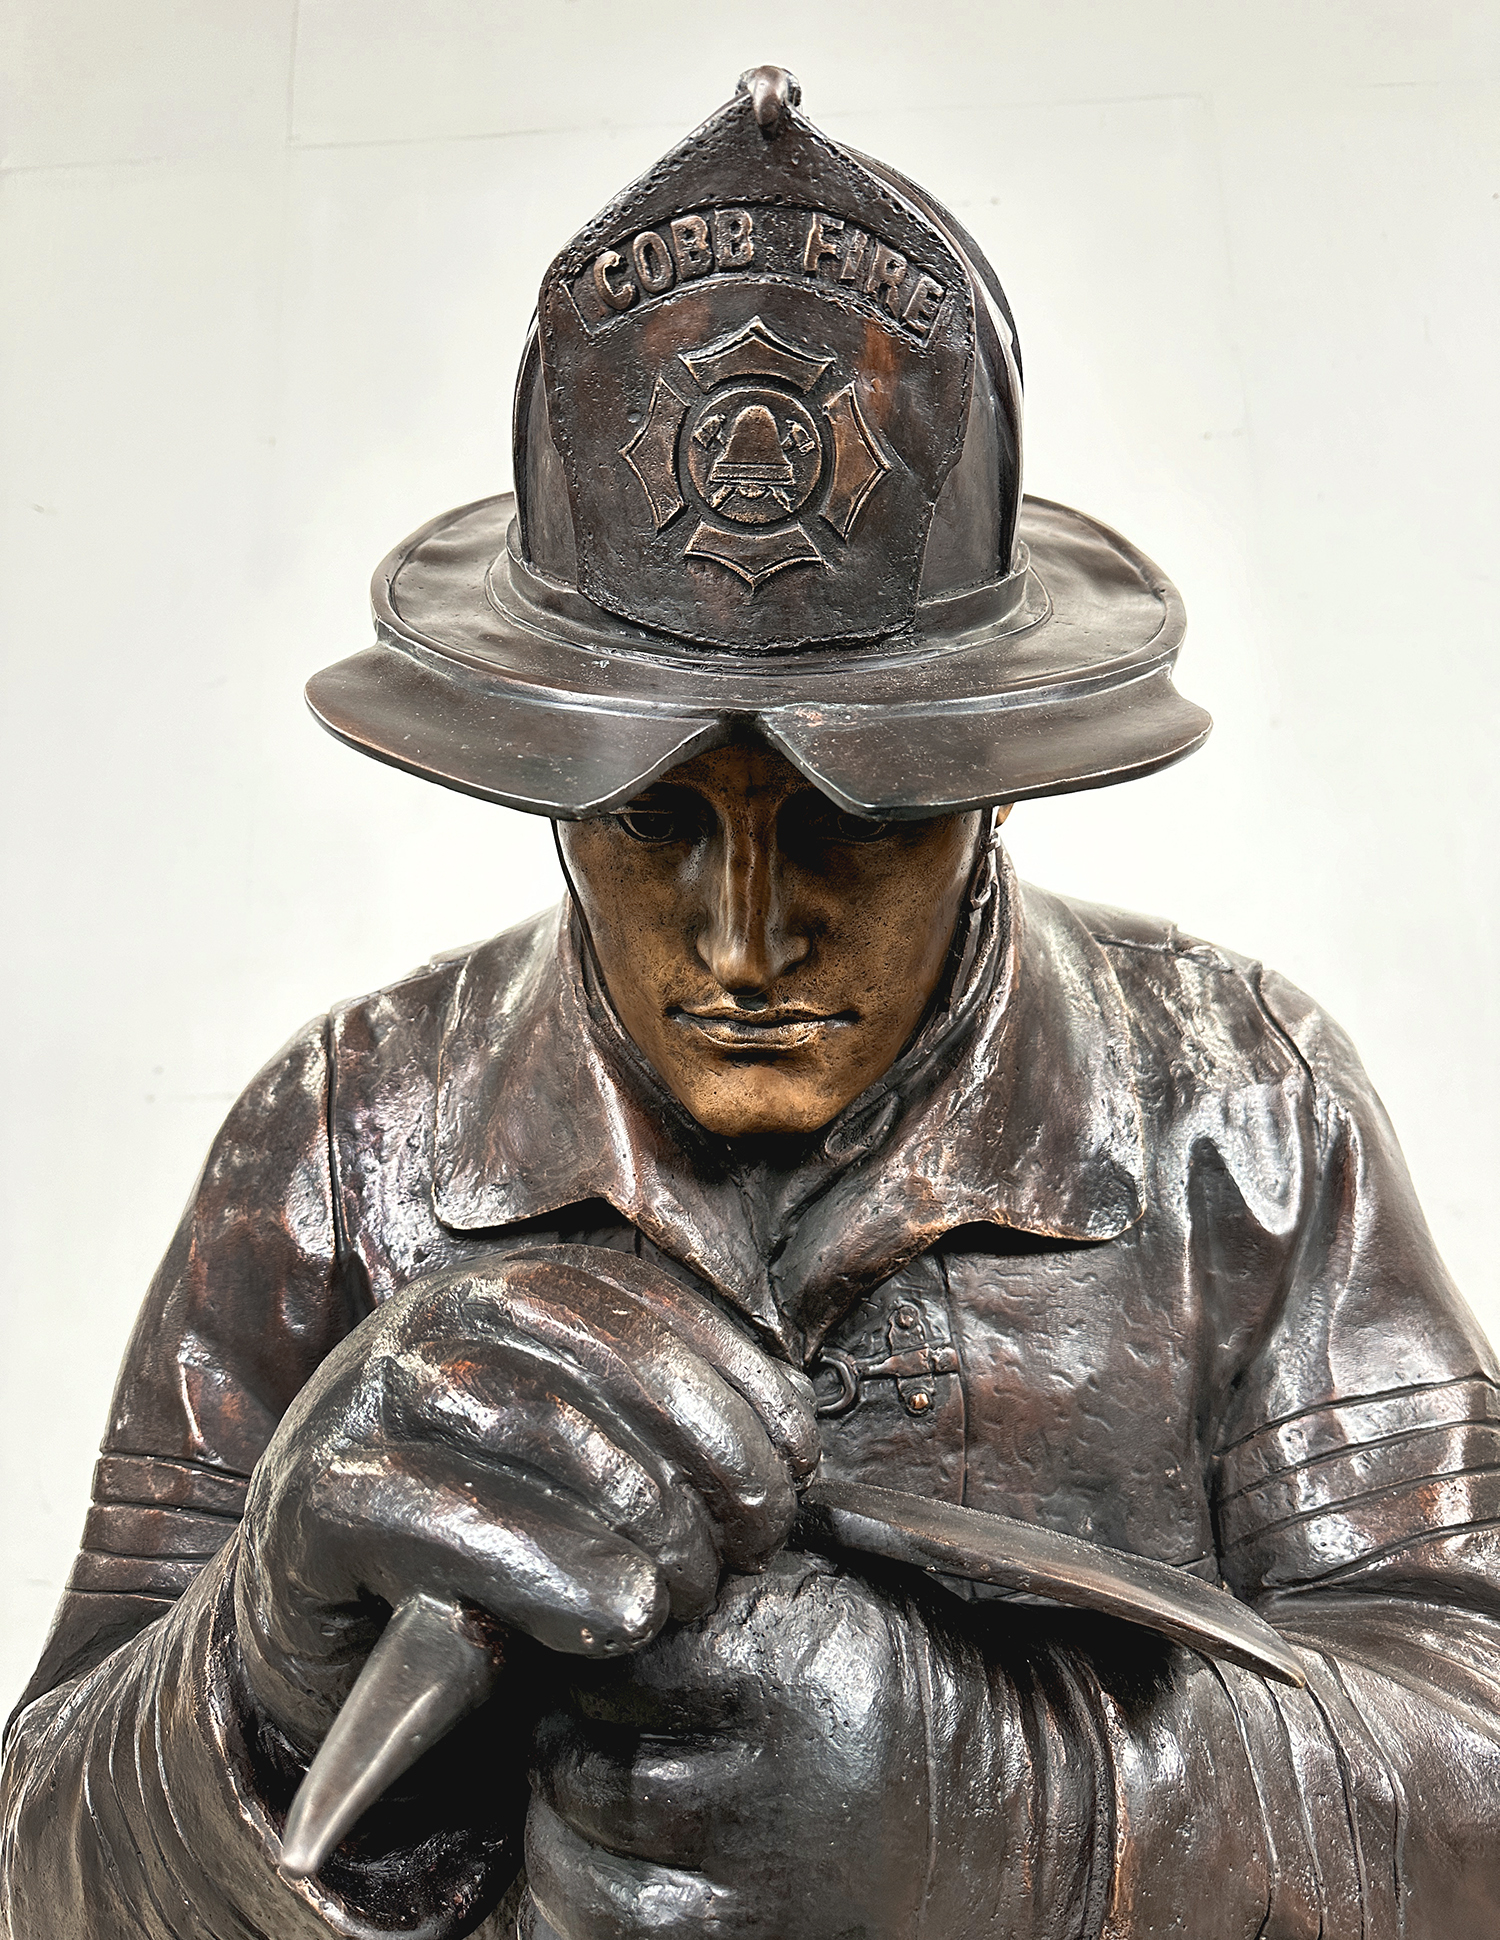 Complete Kneeling Firefighter Custom Bronze Sculpture exclusively designed and produced by Metropolitan Galleries Inc